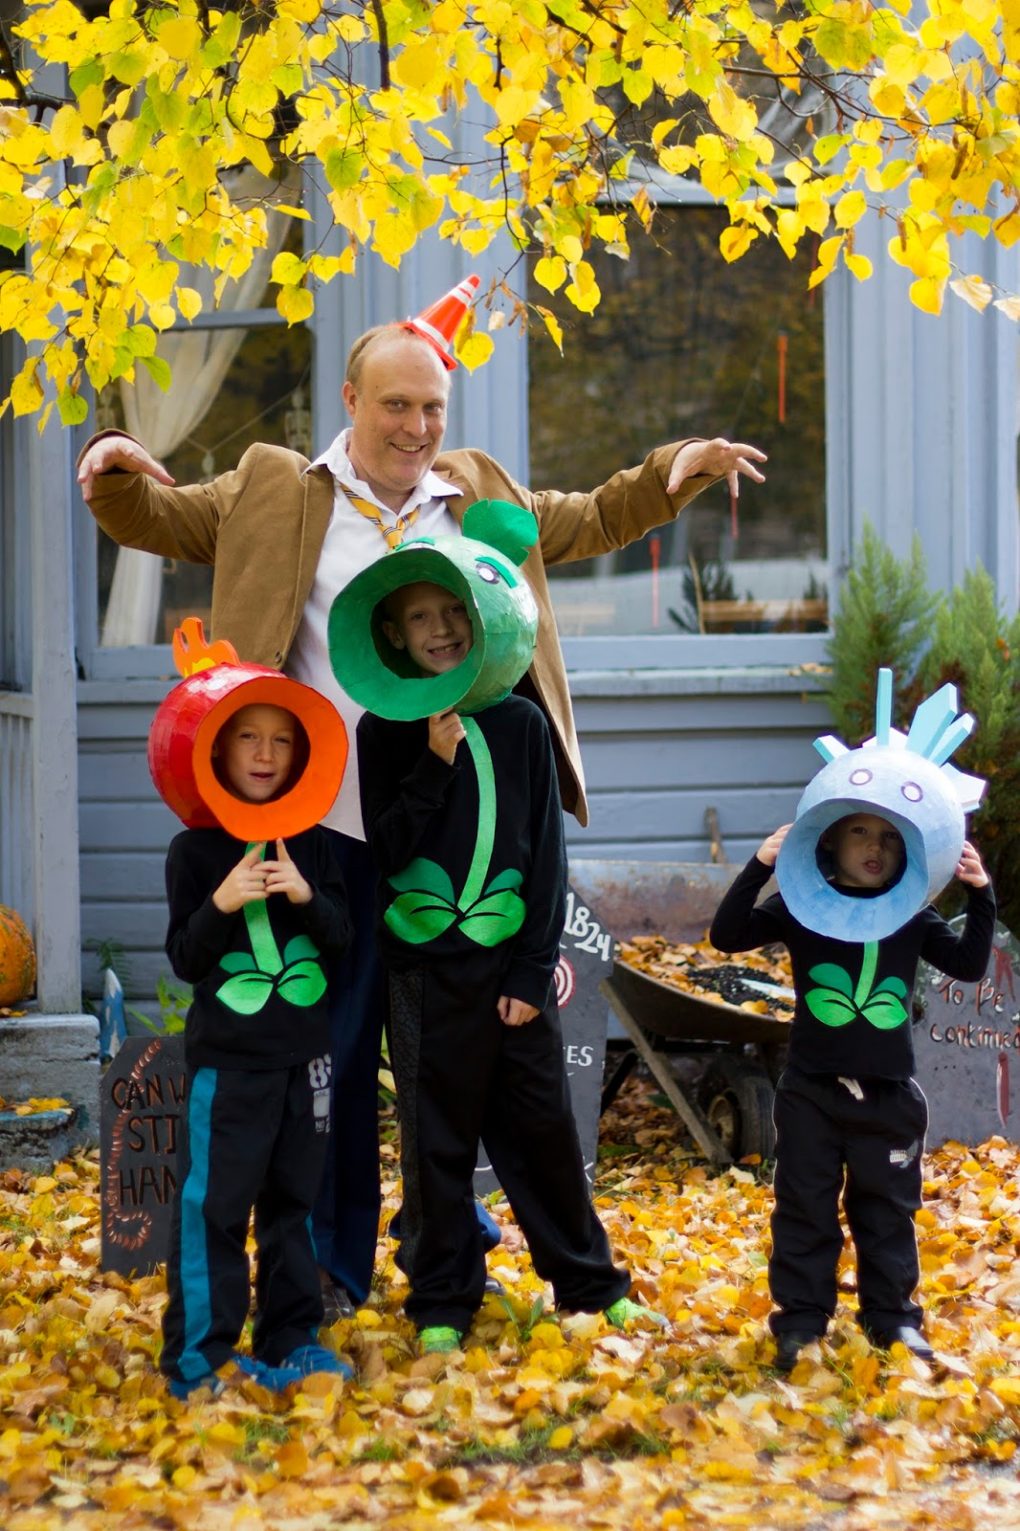 Plants vs. Zombies. Group Halloween costume ideas for your big or small group of family or friends. Creative themed costumes that are easy to DIY or buy last minute.